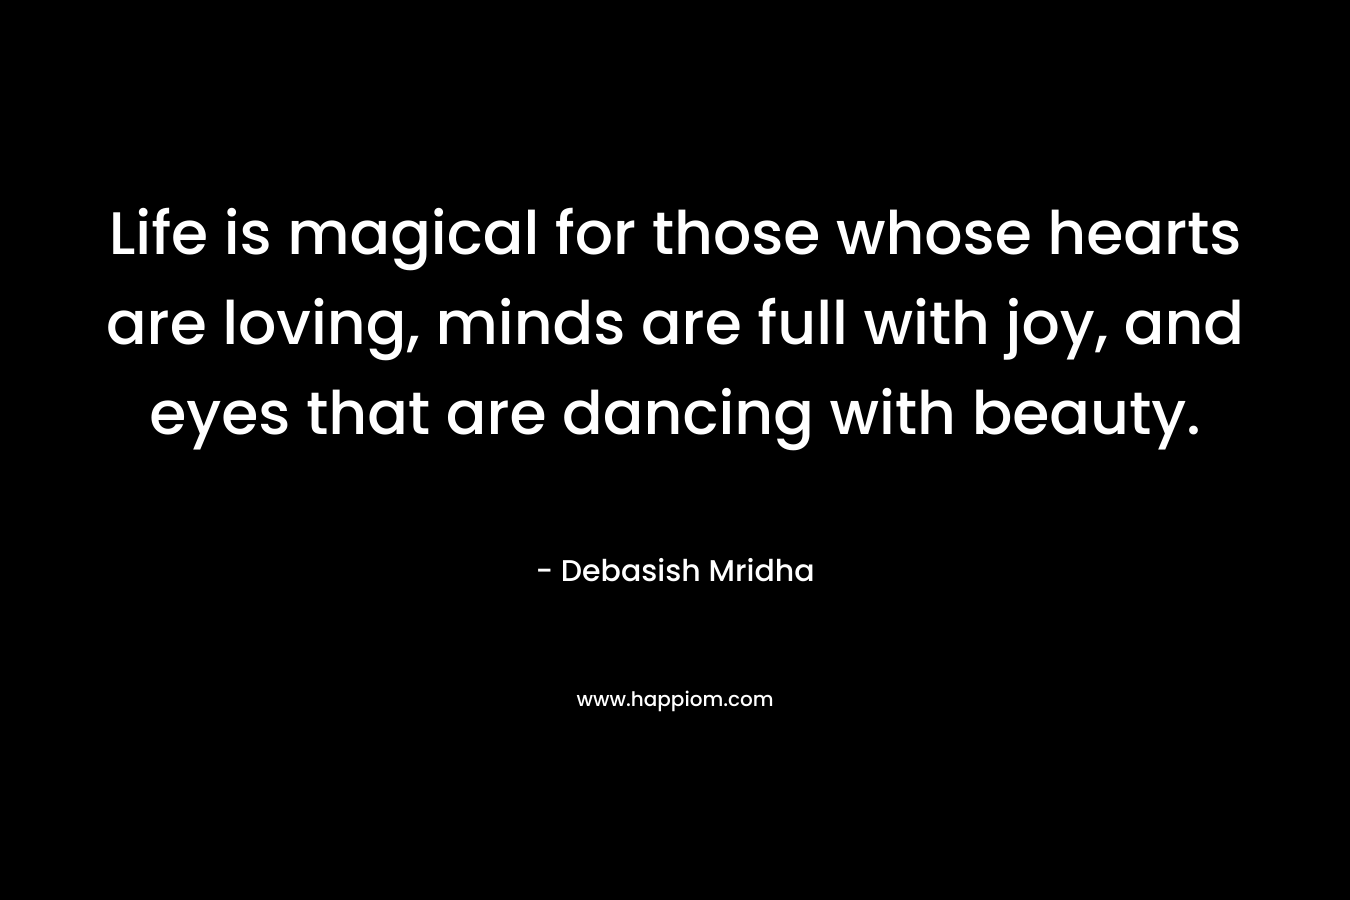 Life is magical for those whose hearts are loving, minds are full with joy, and eyes that are dancing with beauty.